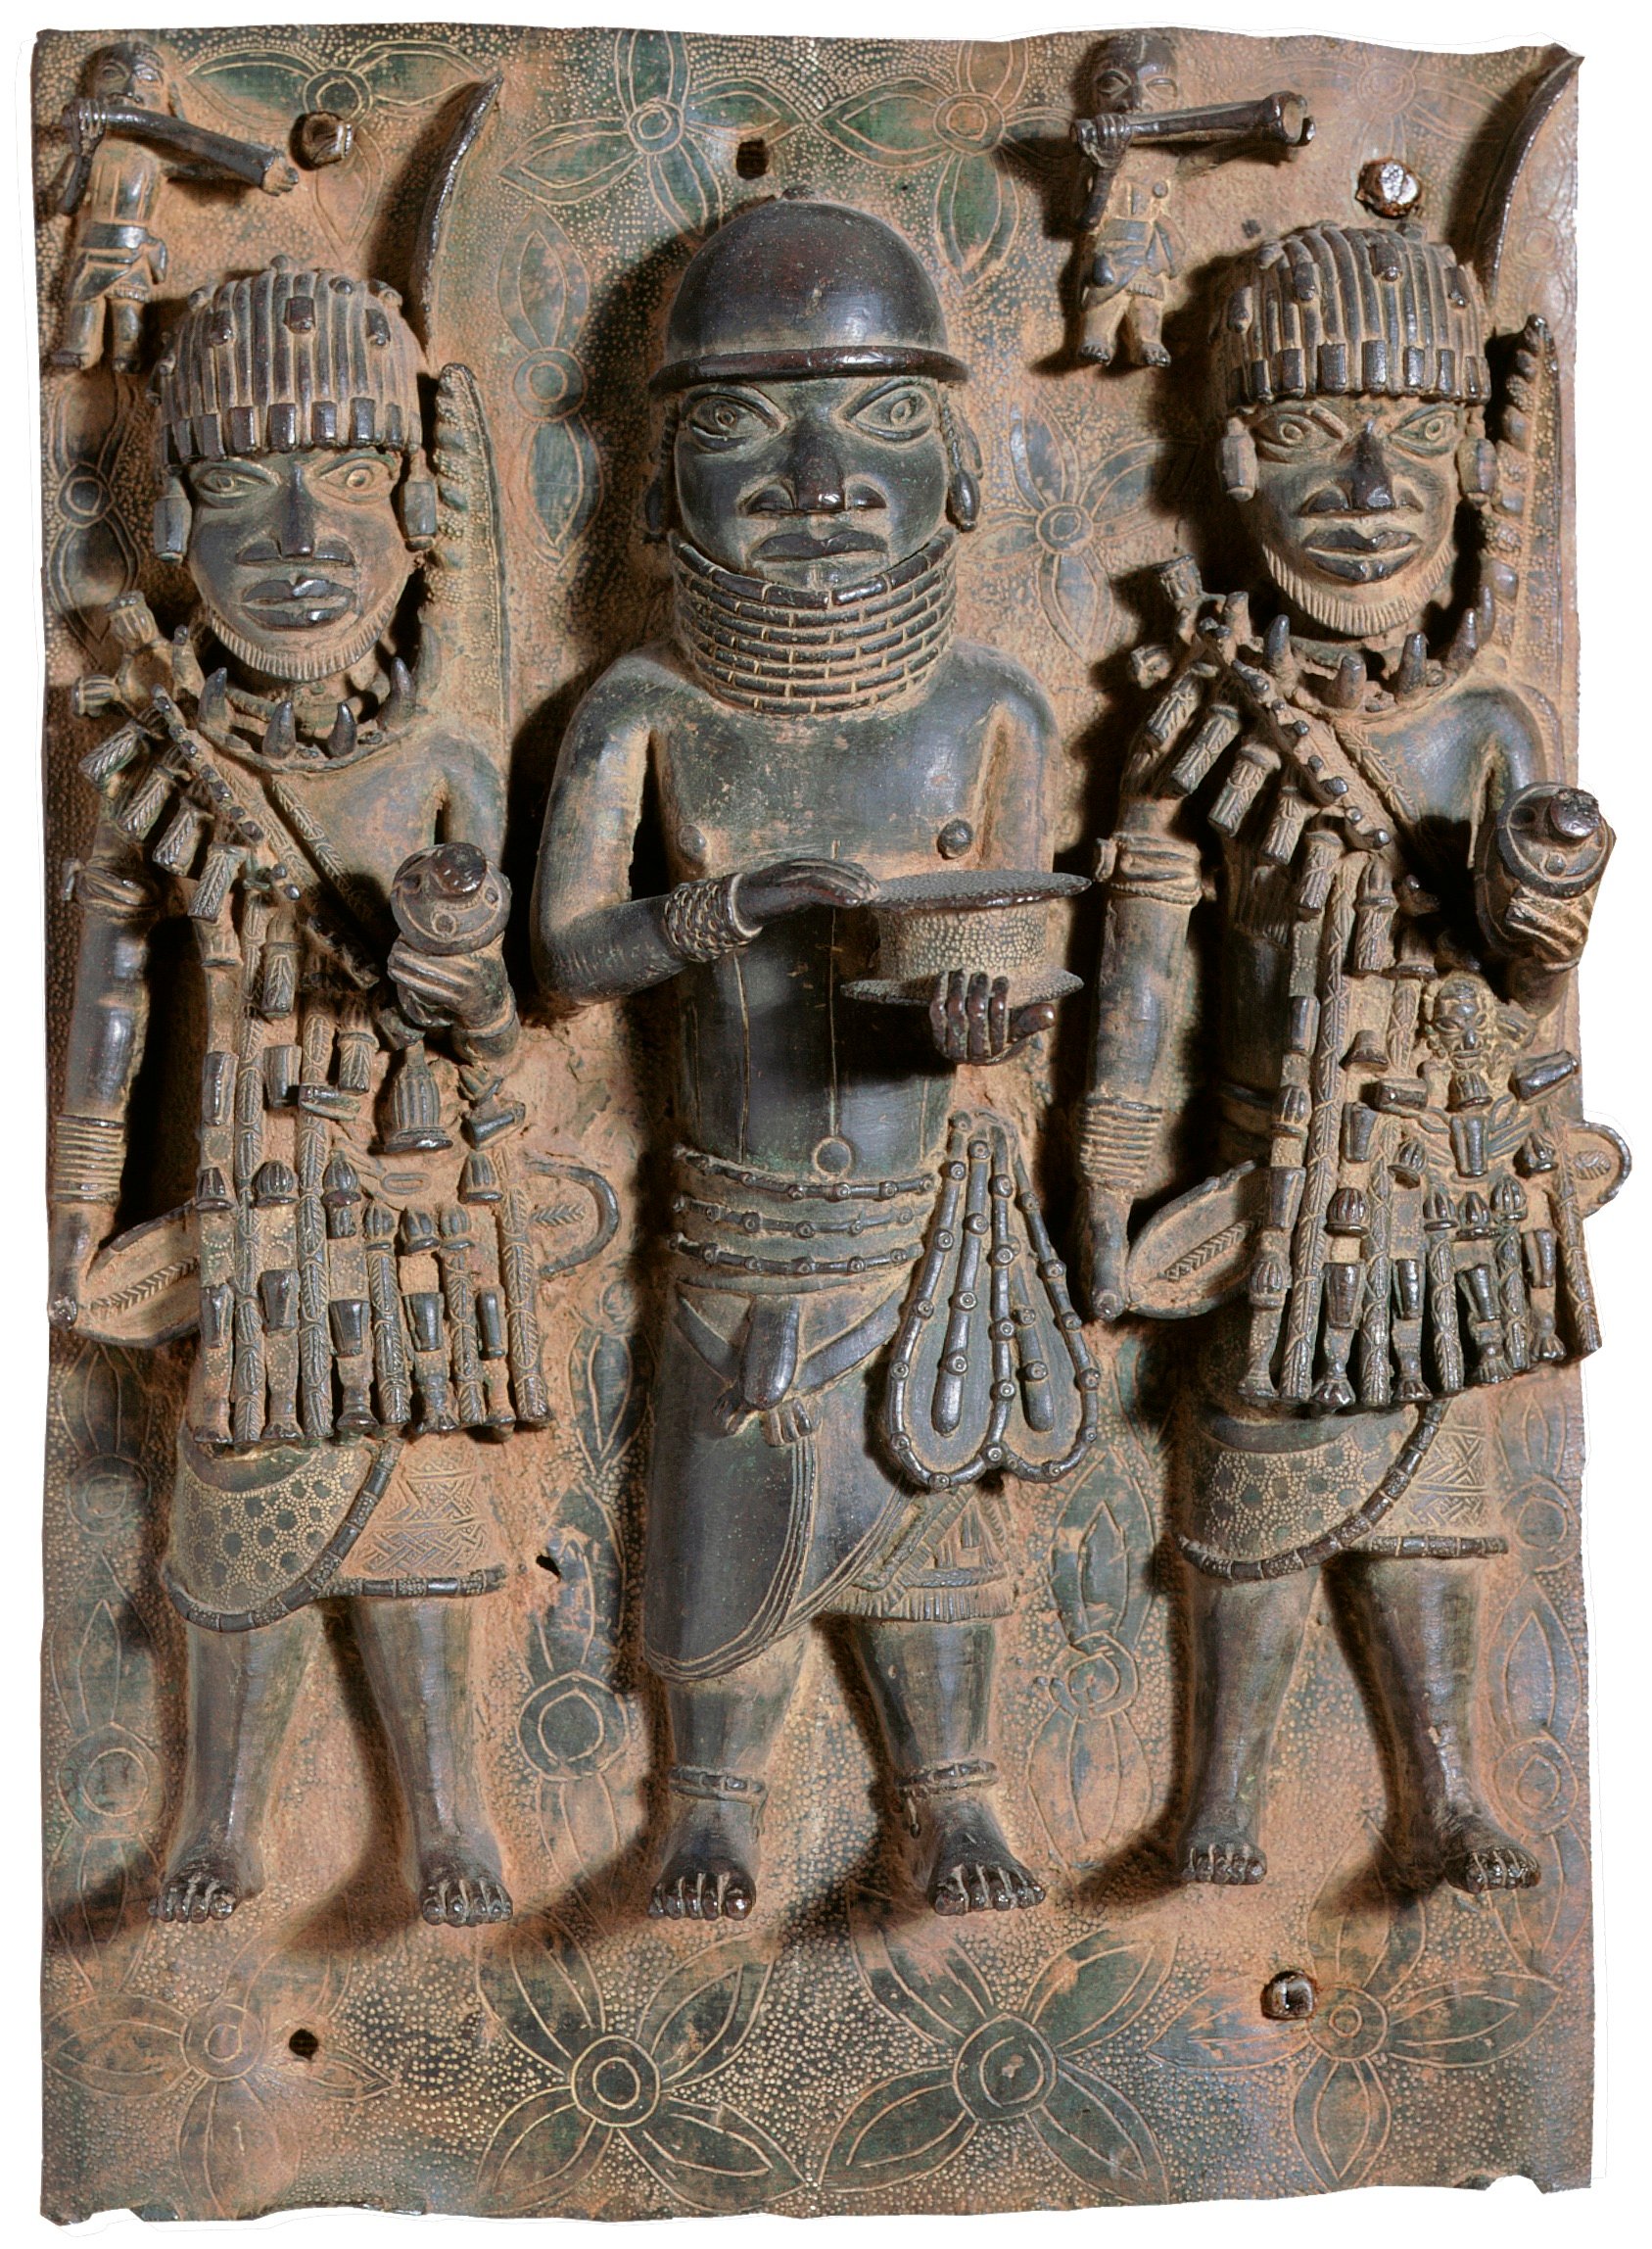 How Did the Benin Bronzes Come Europe? Here's How Colonial Powers Raced to Loot Amid a Program of Imperial Destruction